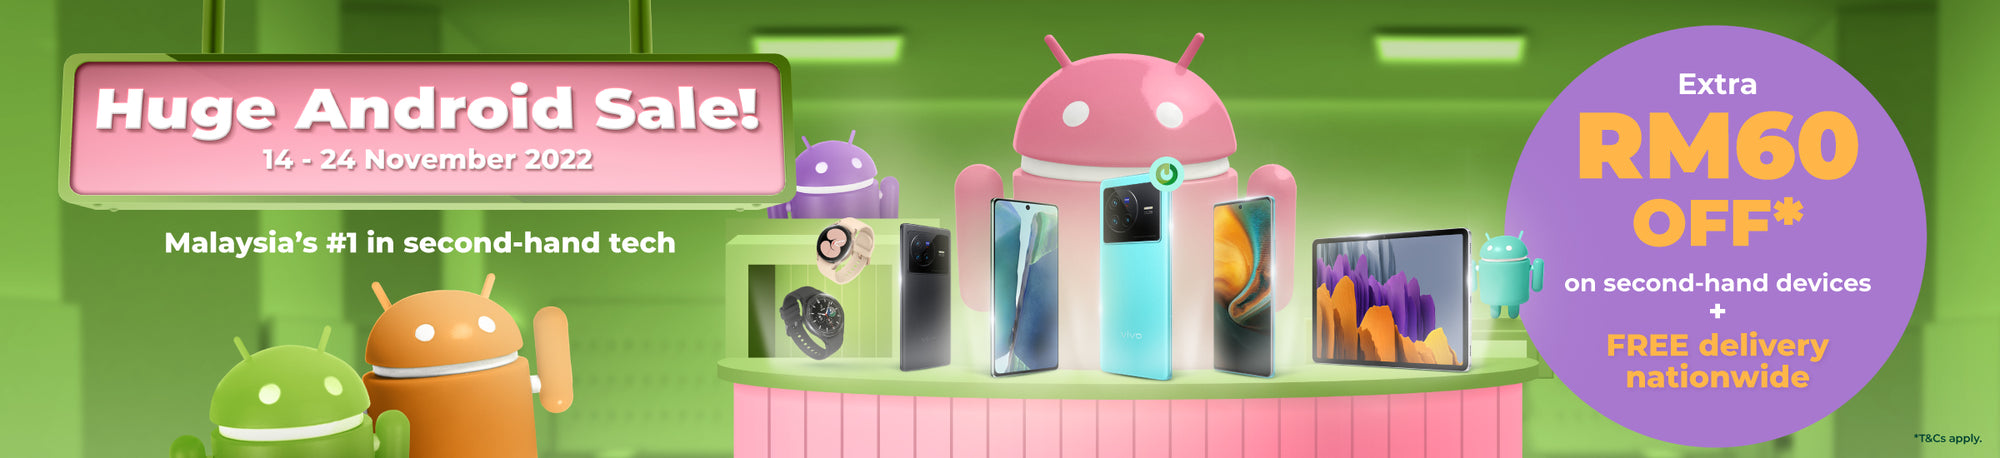 secondhand android sale campaign banner compasia